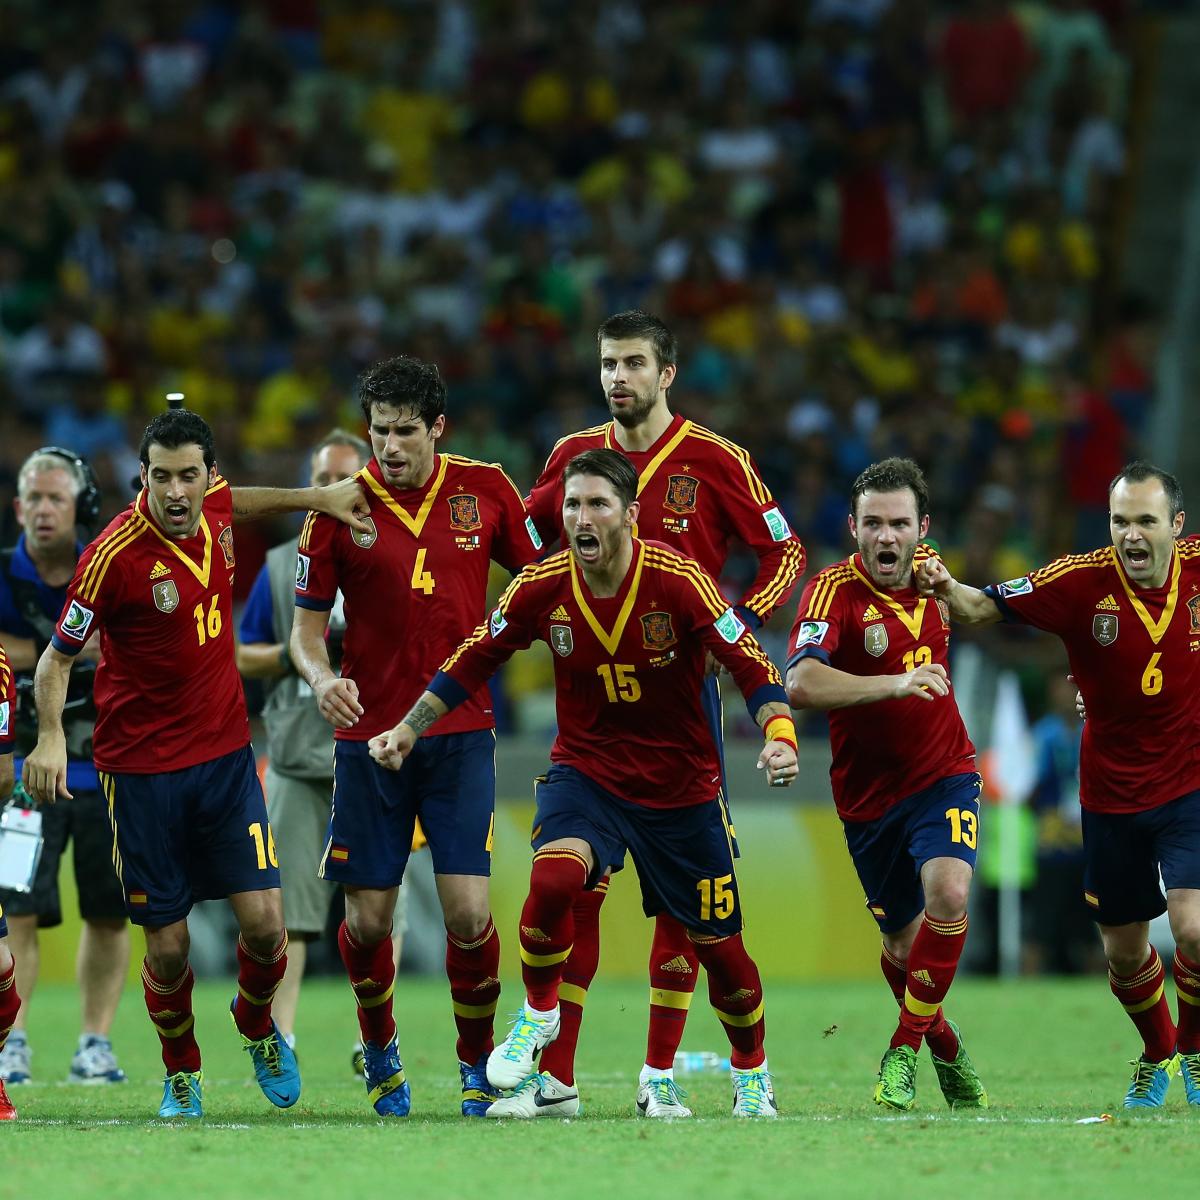 Brazil vs. Spain Date, Start Time, Preview and More News, Scores